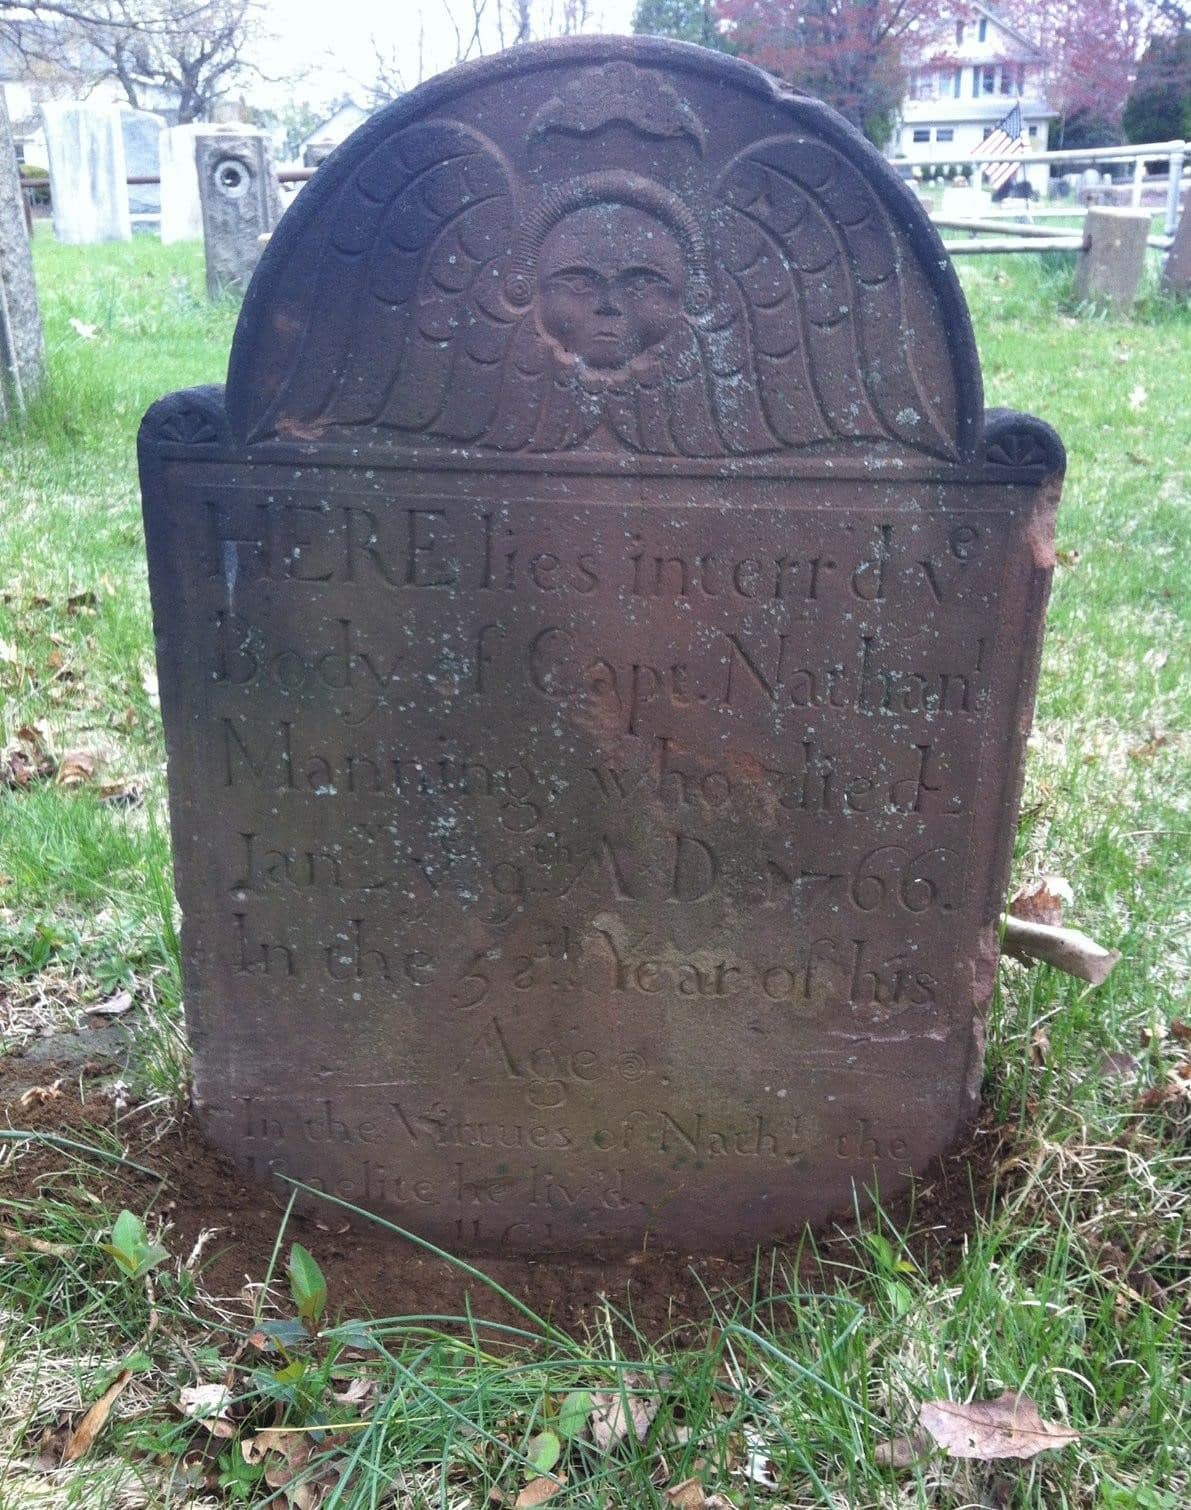 A tombstone from 1766 in the Piscatawaytown Burial Ground